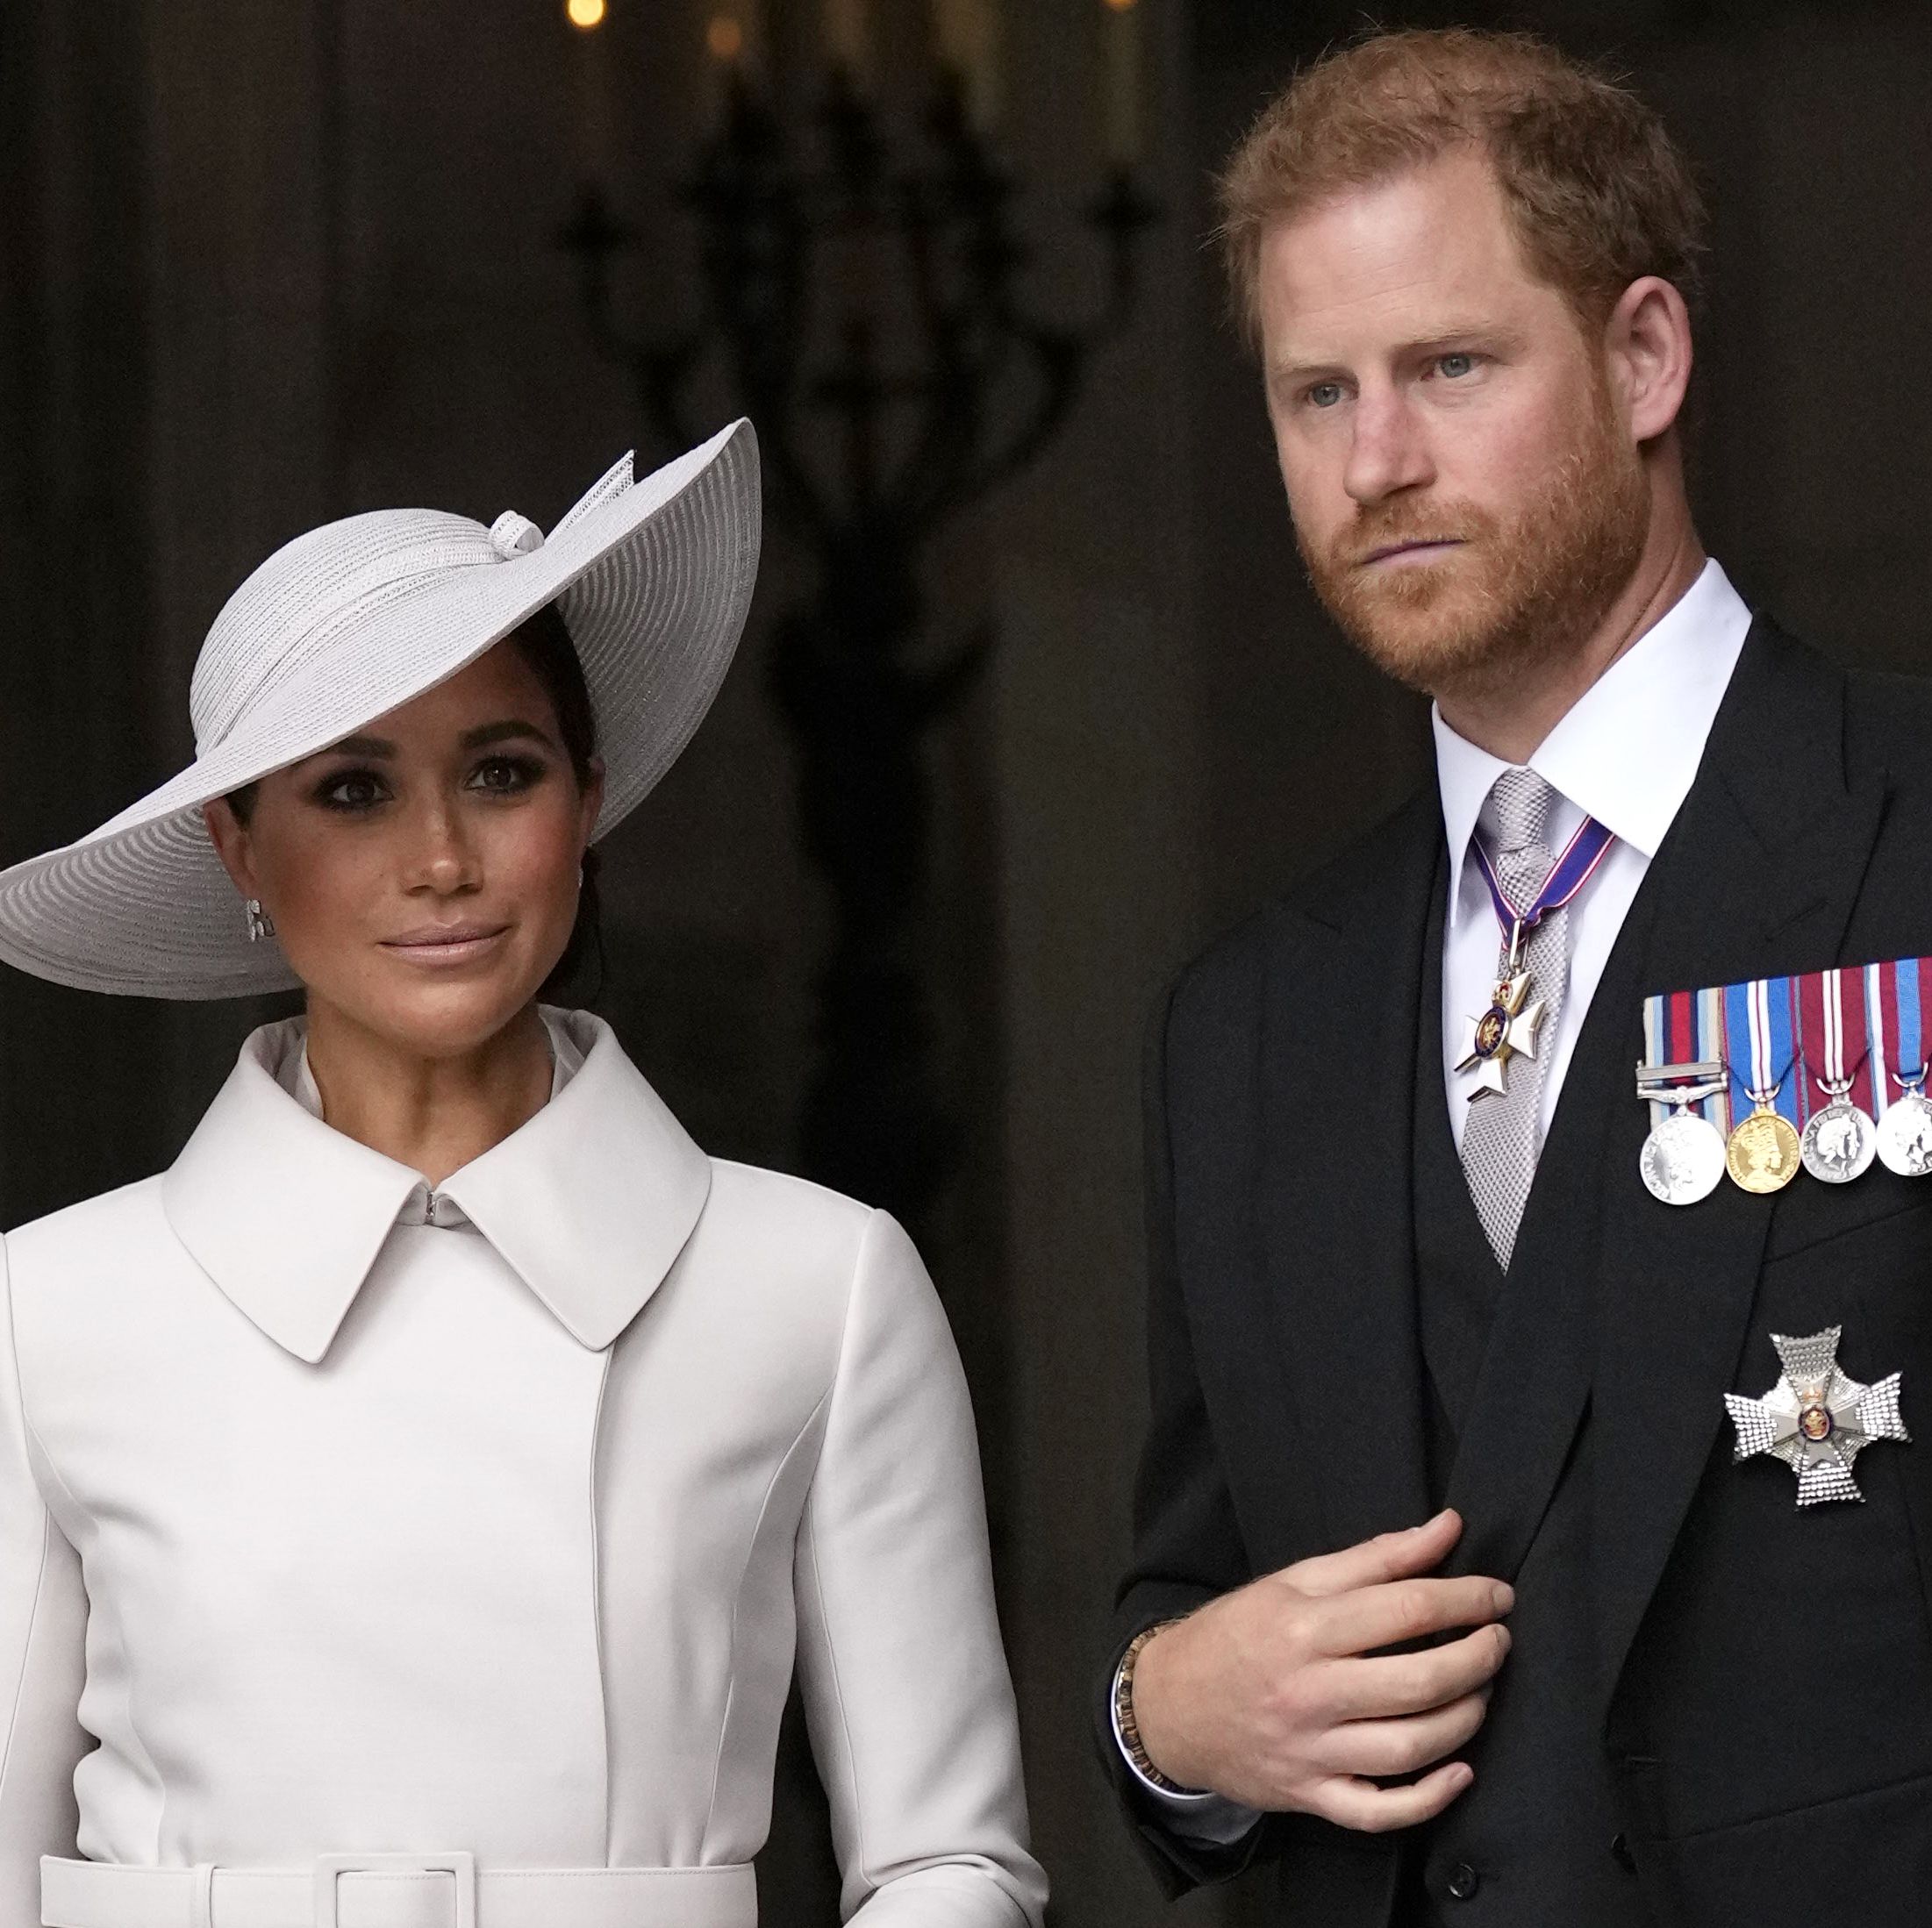 Prince Harry and Meghan Markle Were Purposefully Snubbed at the BAFTAs Tea Party Over Potential 